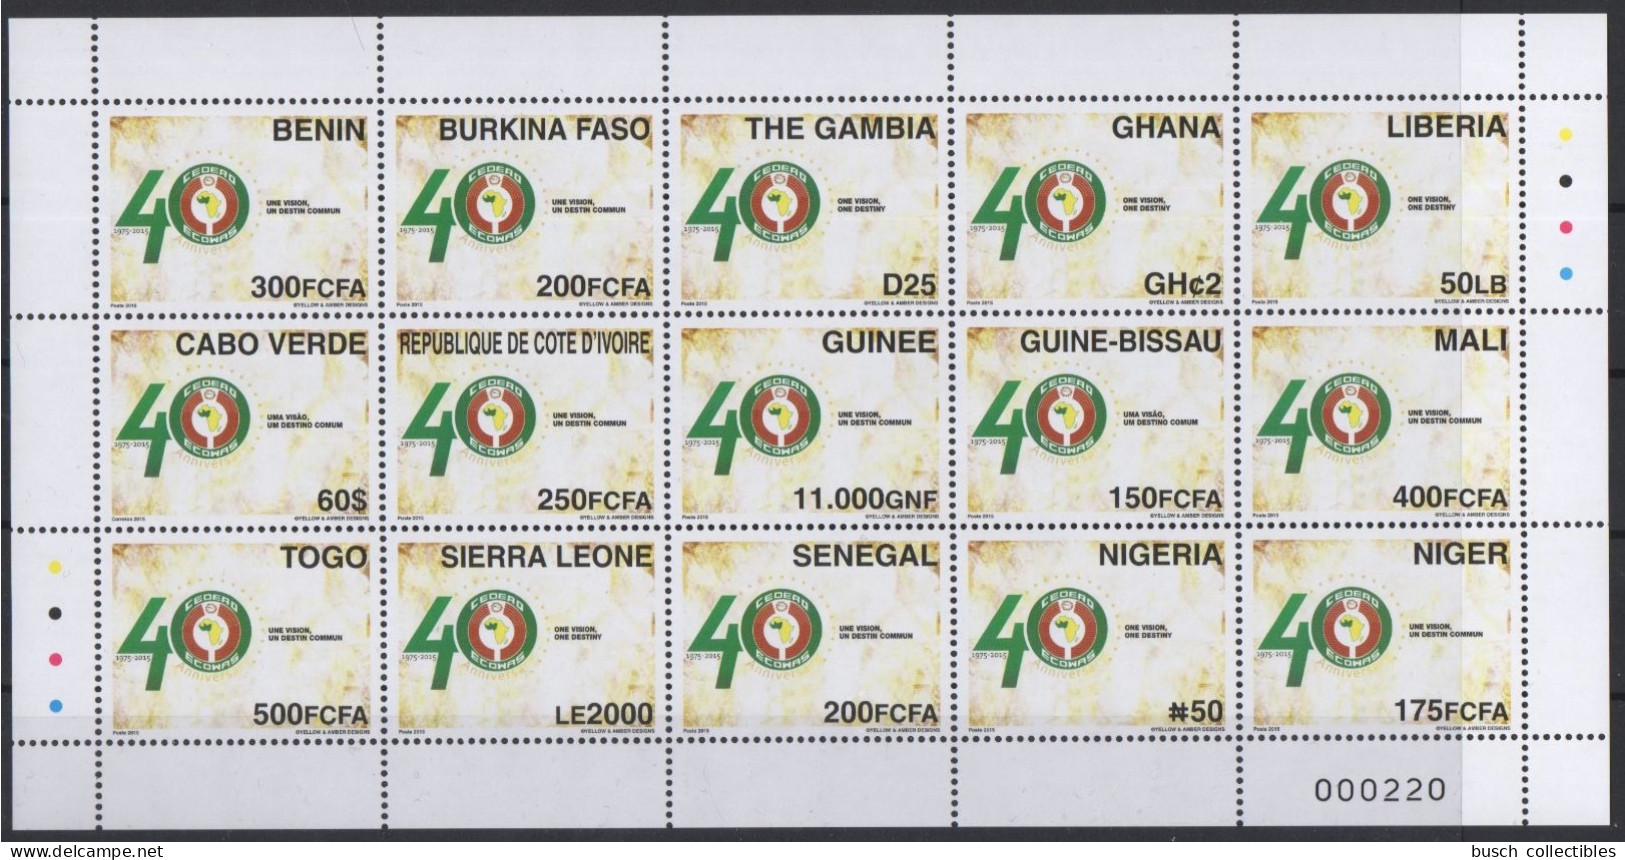 ULTRA RARE Feuille 15 Pays 15 Countries Sheet 15 Länder 2015 Emission Commune Joint Issue CEDEAO ECOWAS 40 Ans 40 Years - Guinée-Bissau